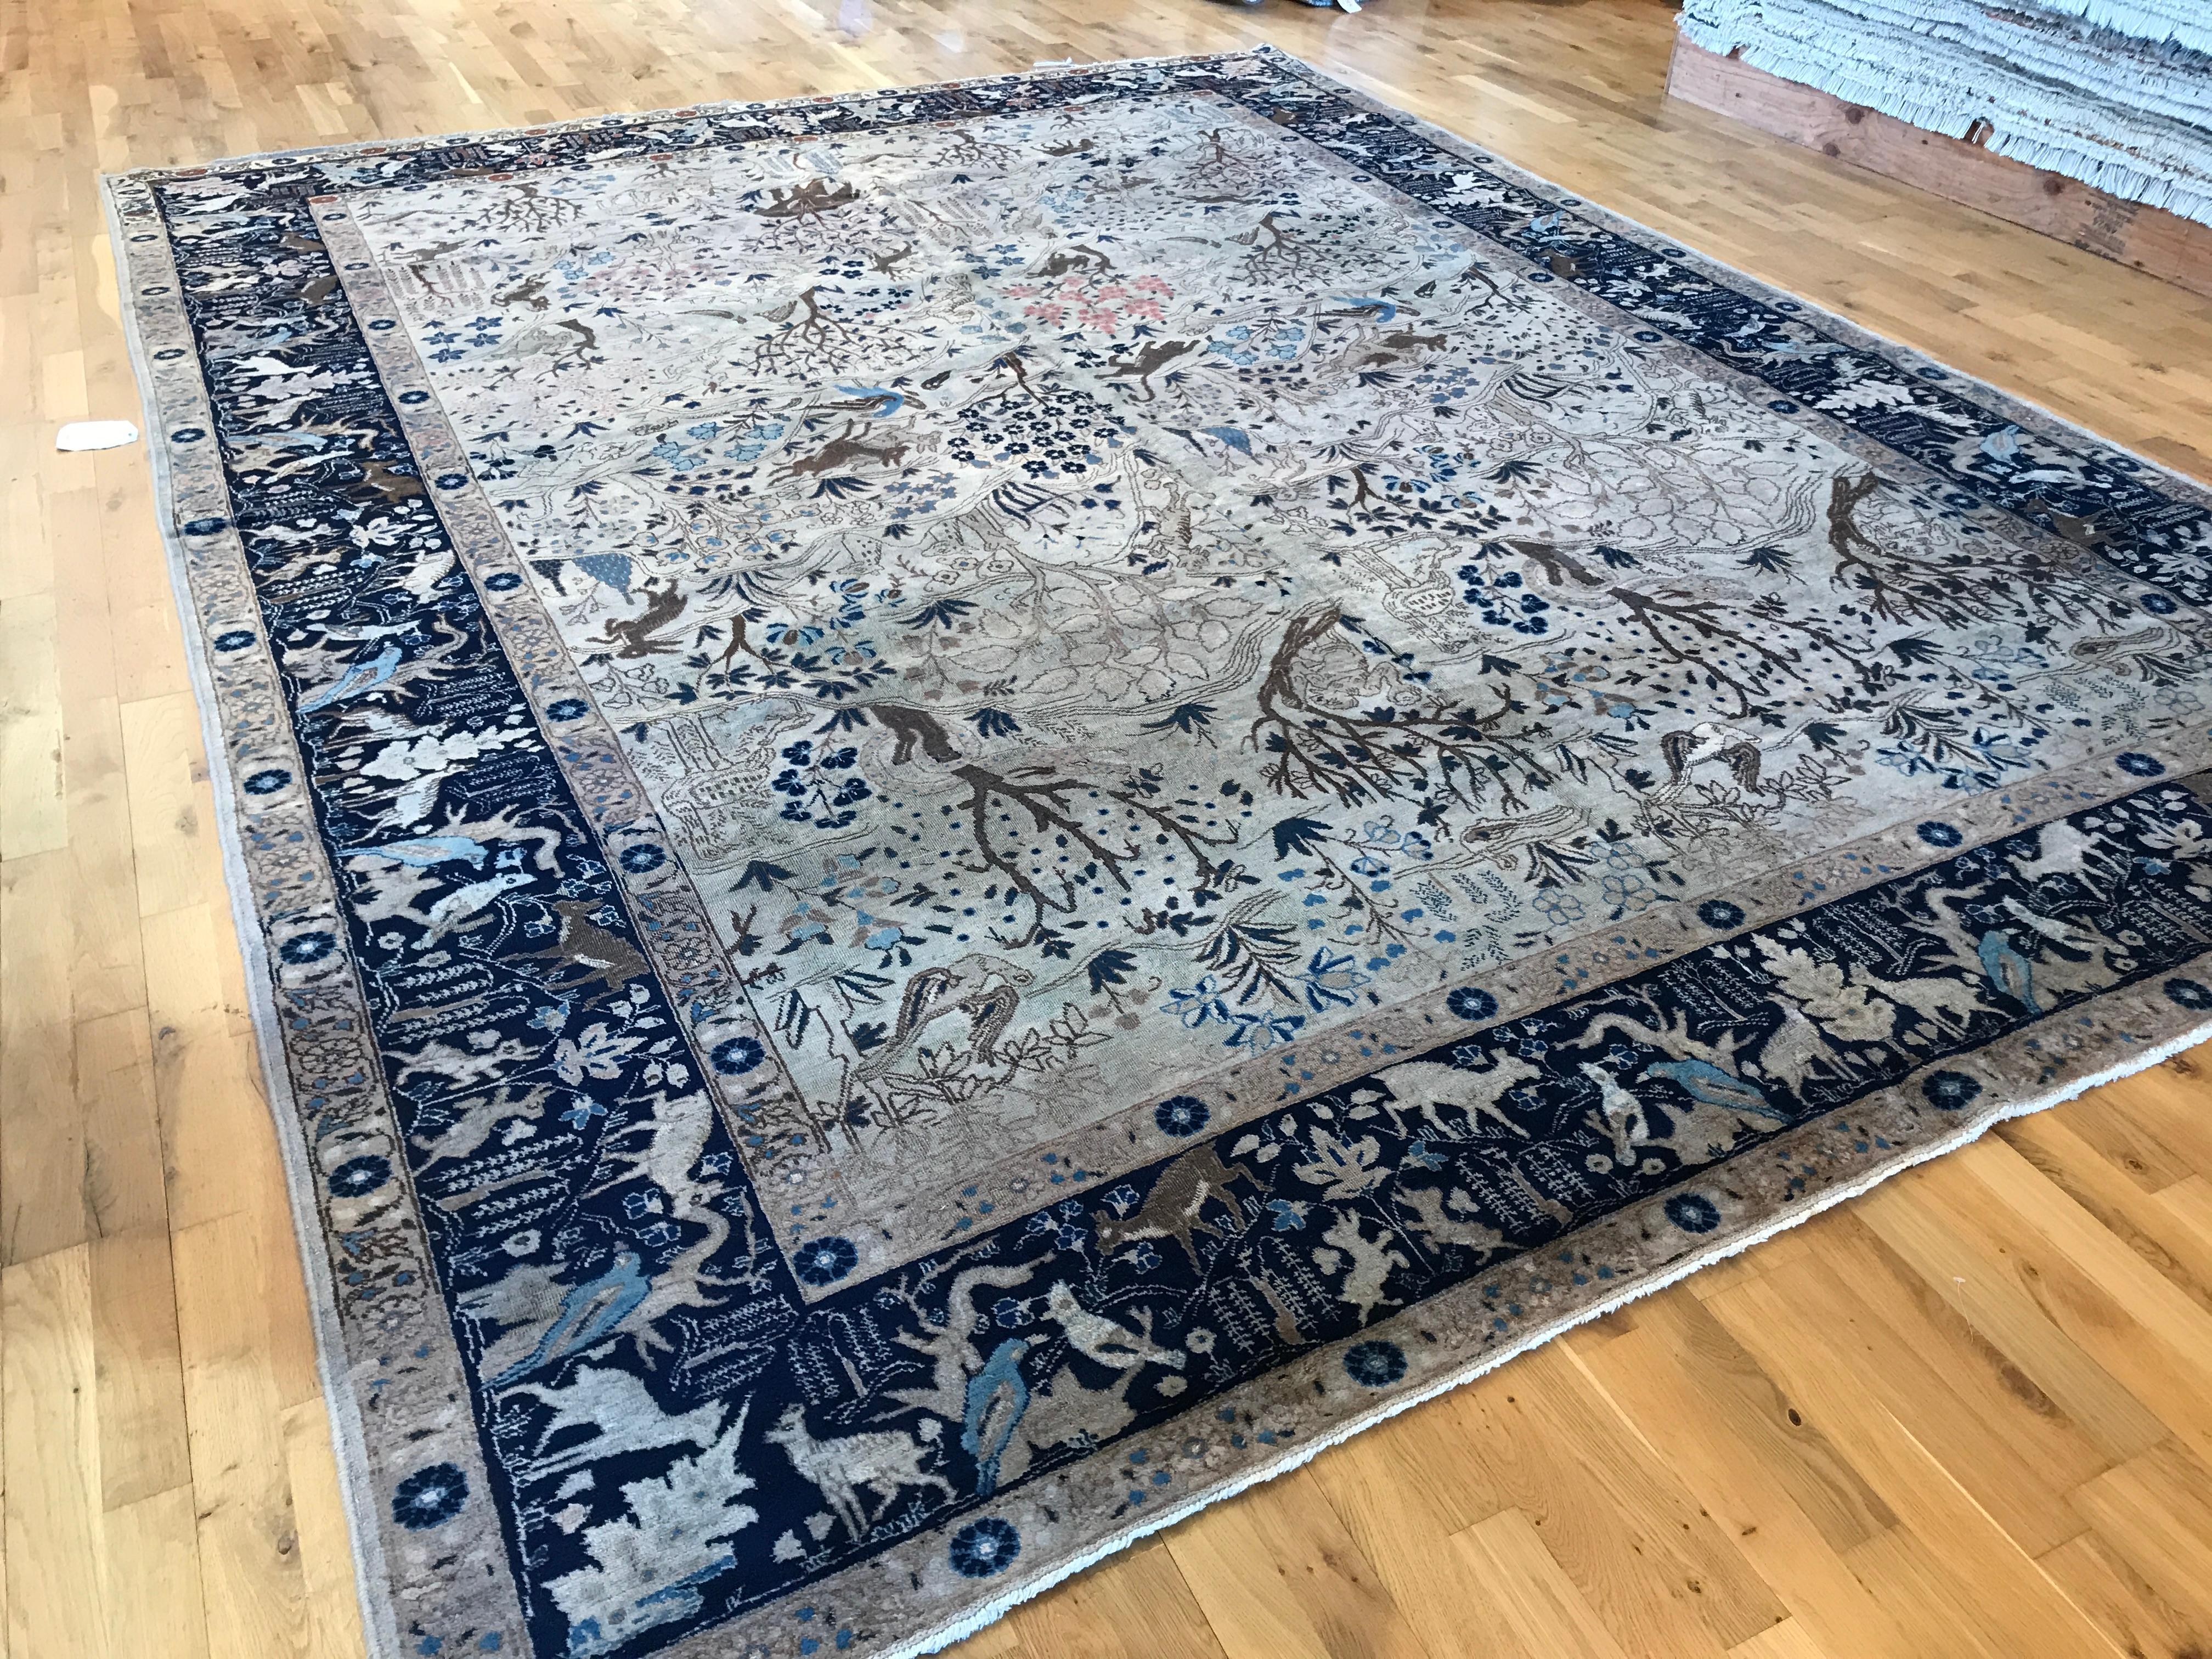 Antique pictorial Tabriz rug circa 1890

Navy blue border with tan field. The field is a picturesque scene of deers, rabbits and trees. All wool, vegetal dyed, hand knotted by master weaver in Iran.